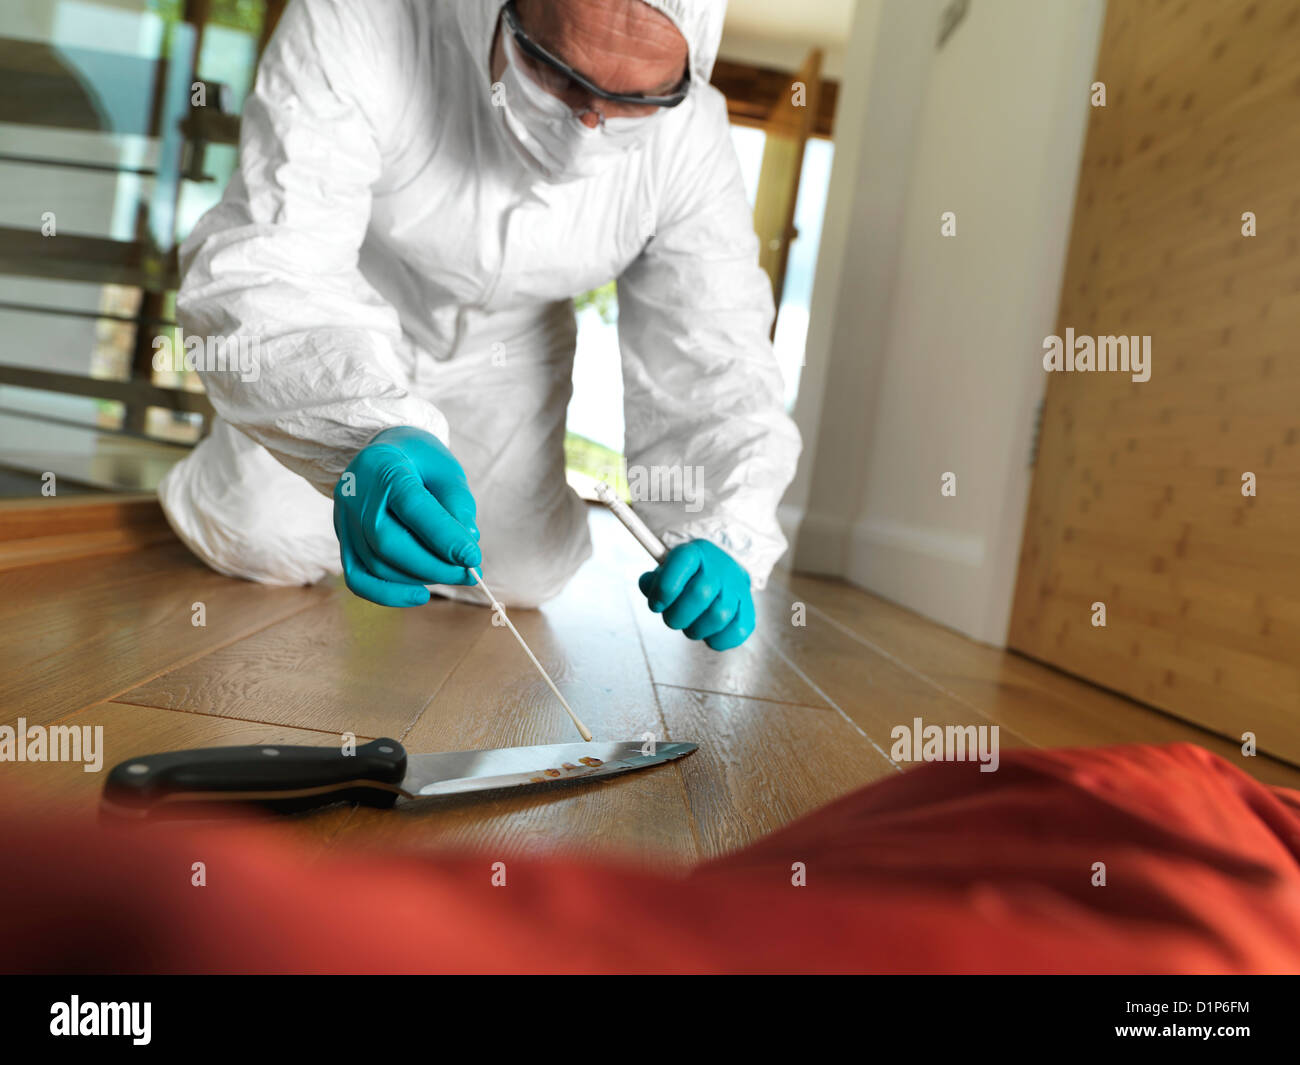 Collecting forensic evidence Stock Photo